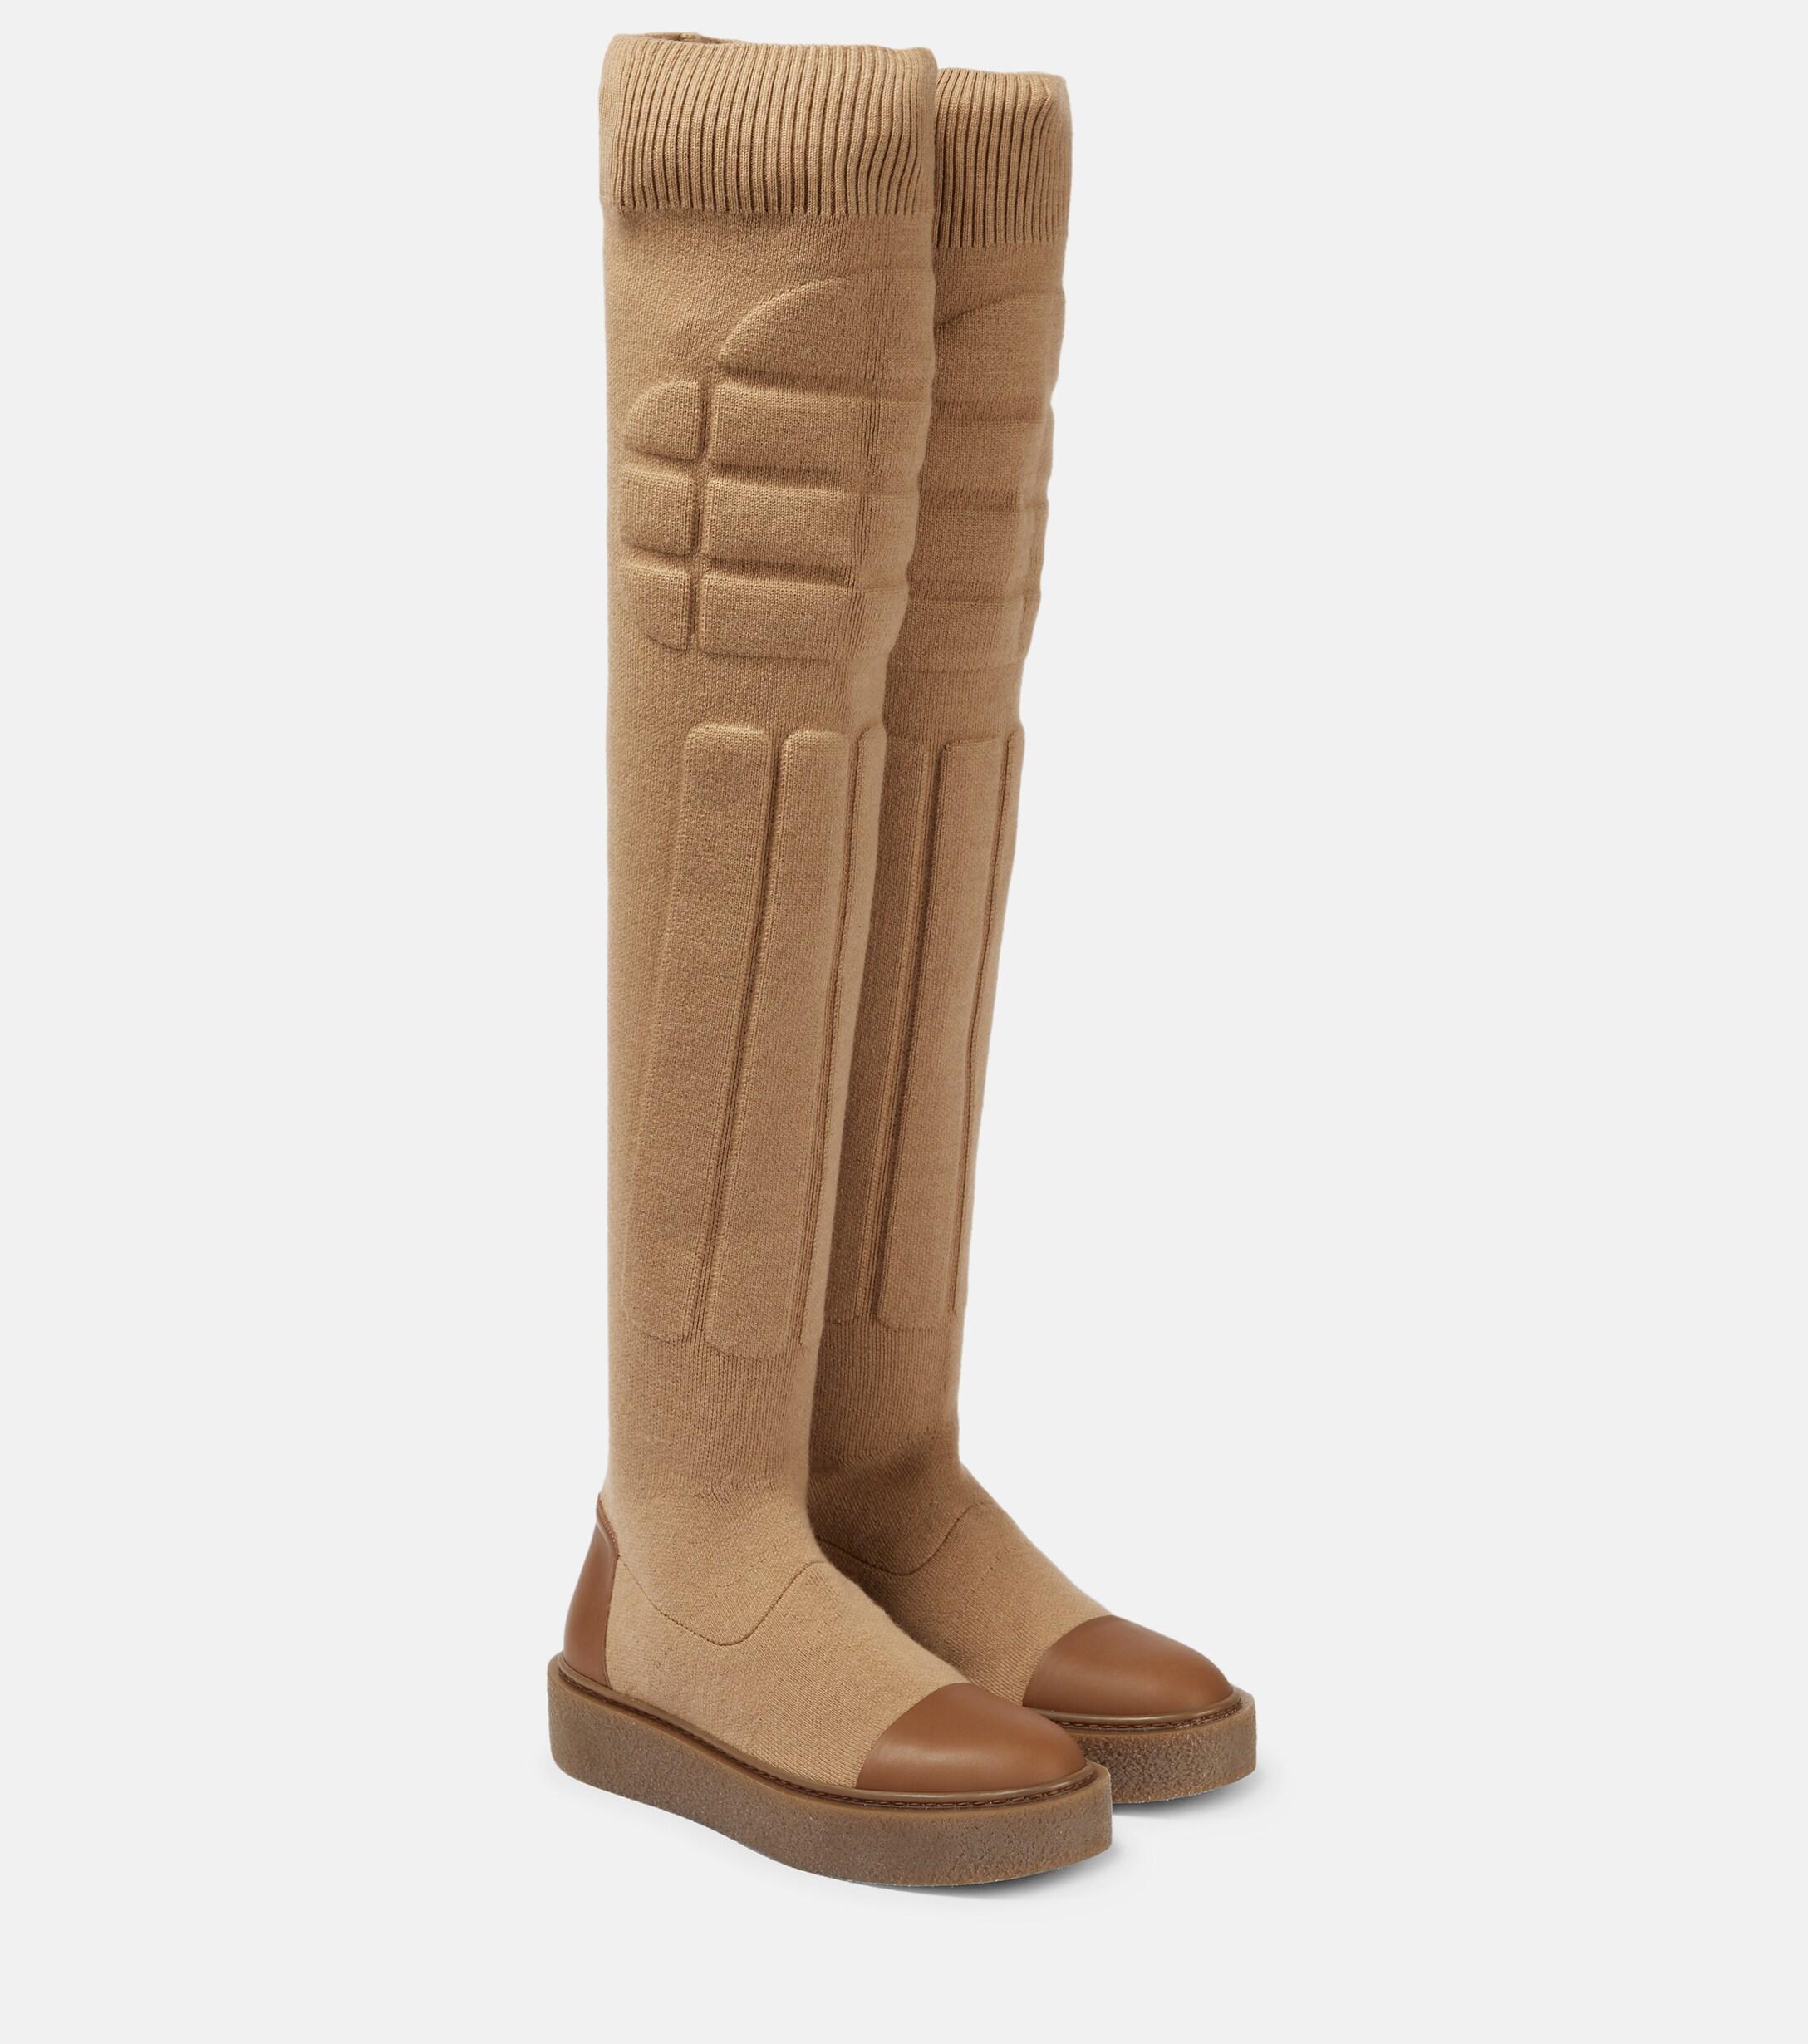 Max Mara Woolin Knit Over-the-knee Boots in Brown | Lyst Canada